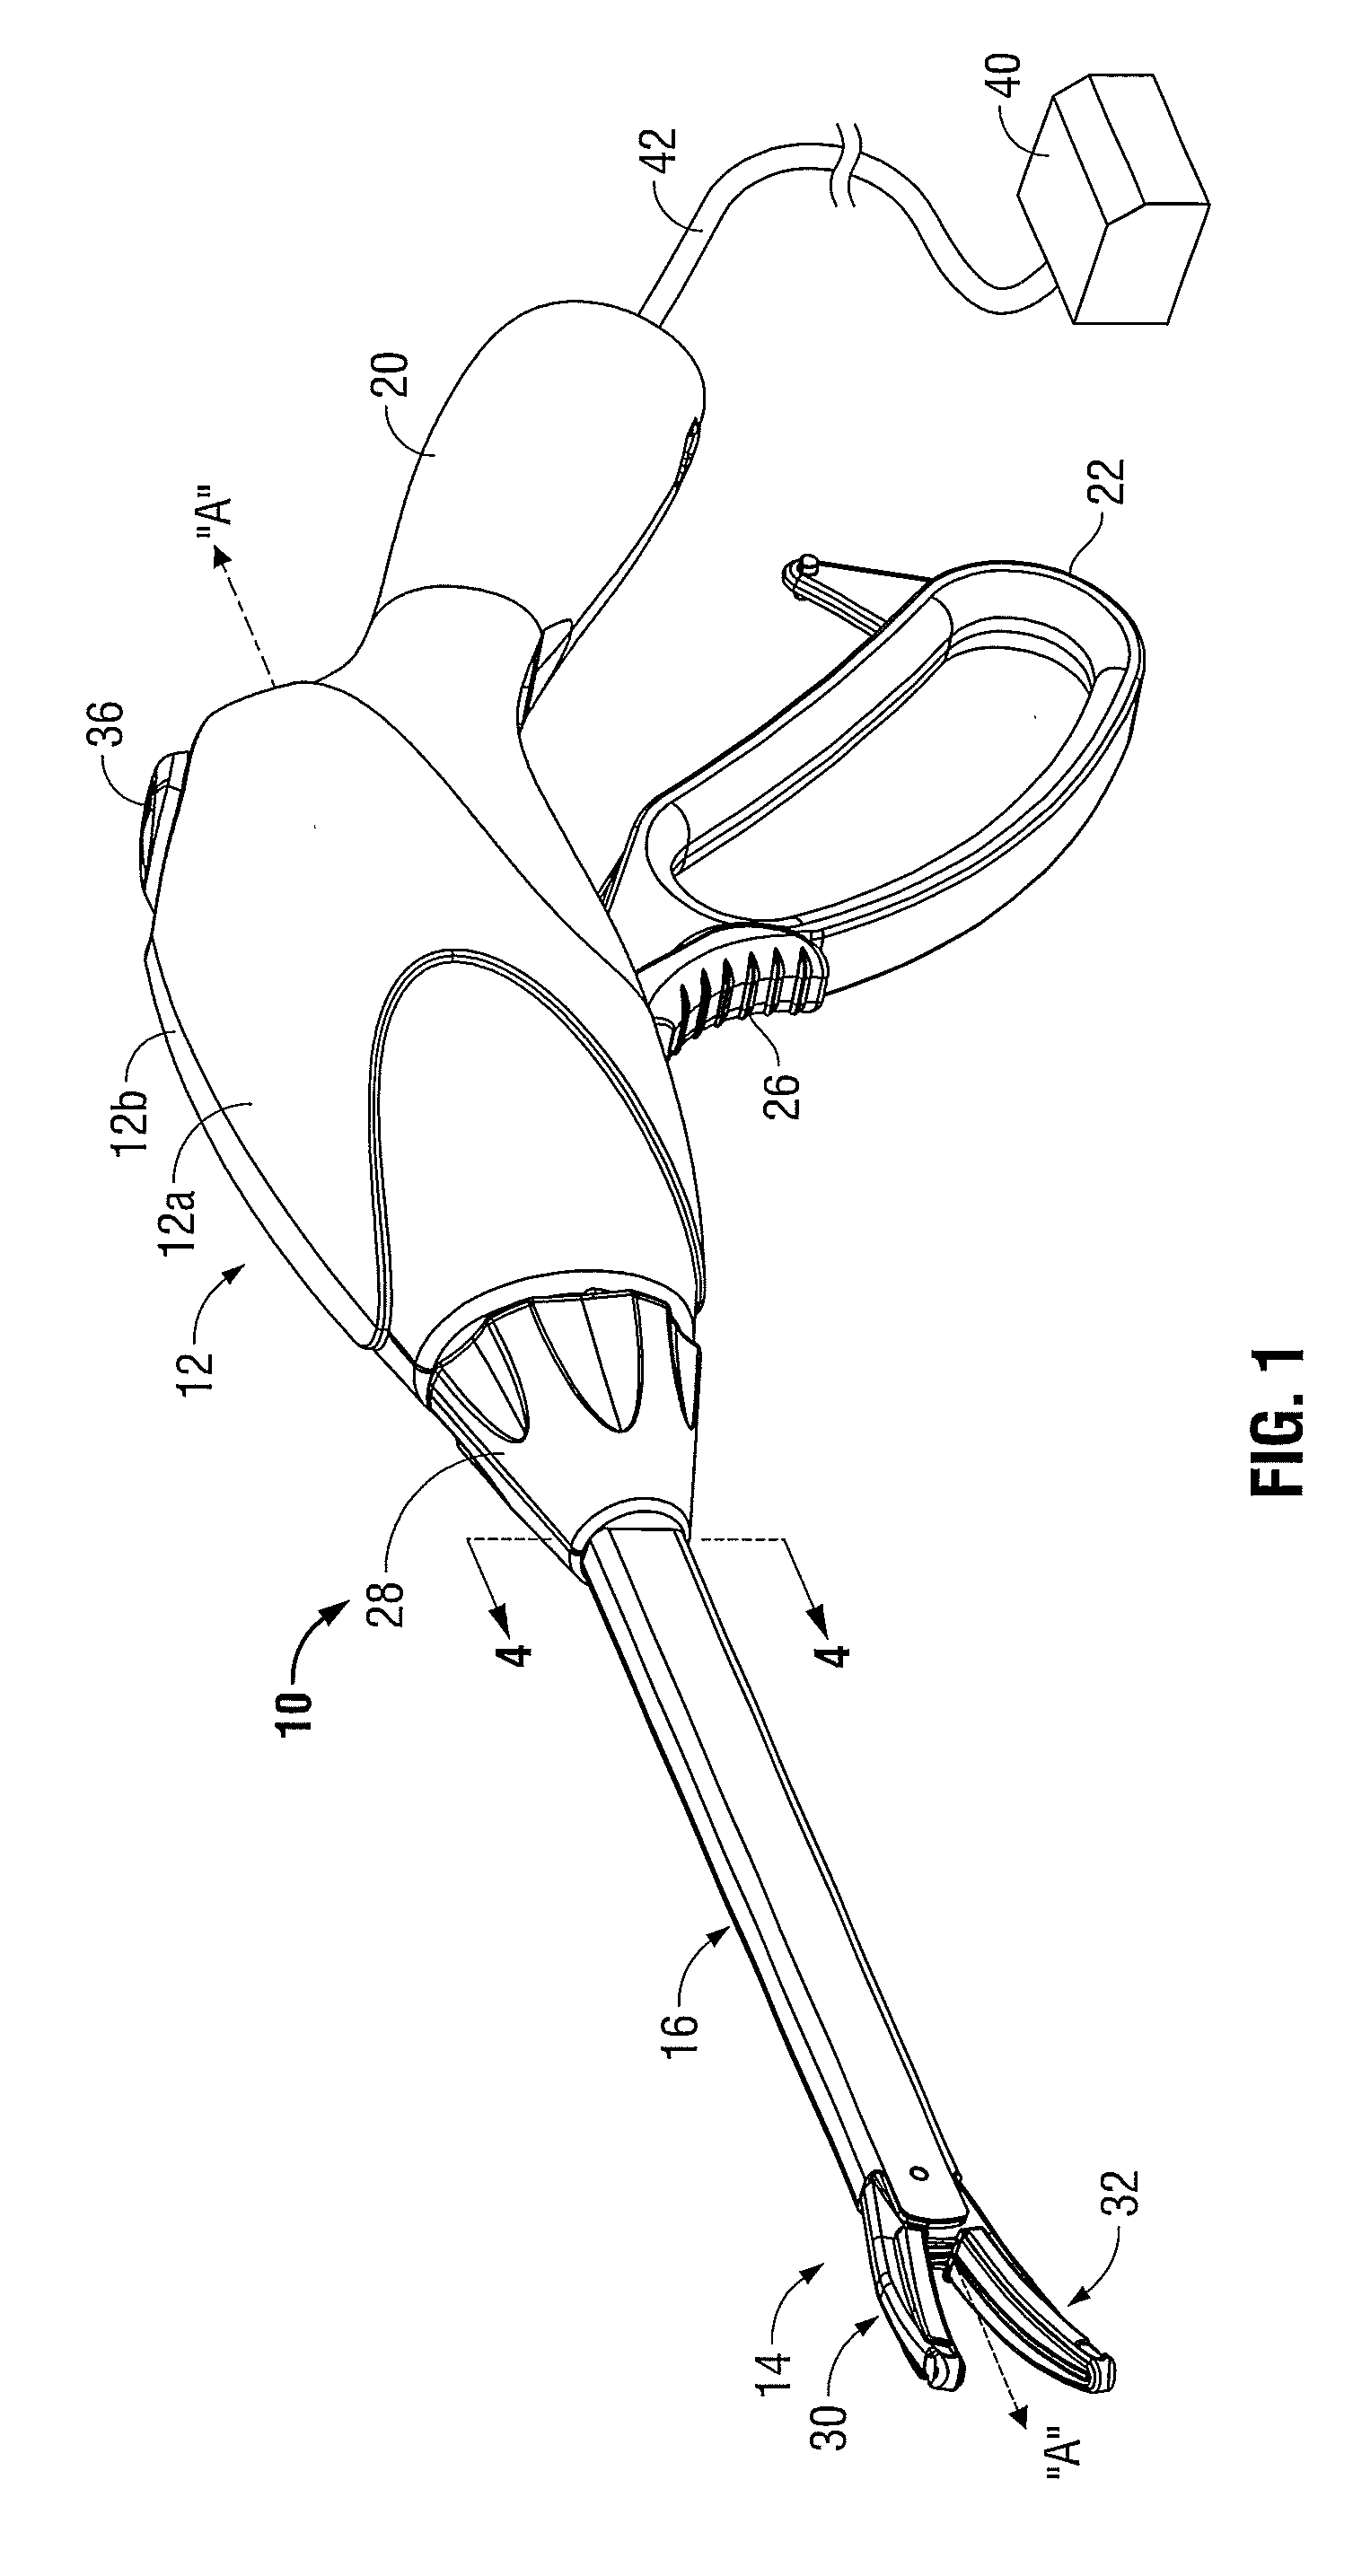 Surgical instrument with stamped double-flag jaws and actuation mechanism